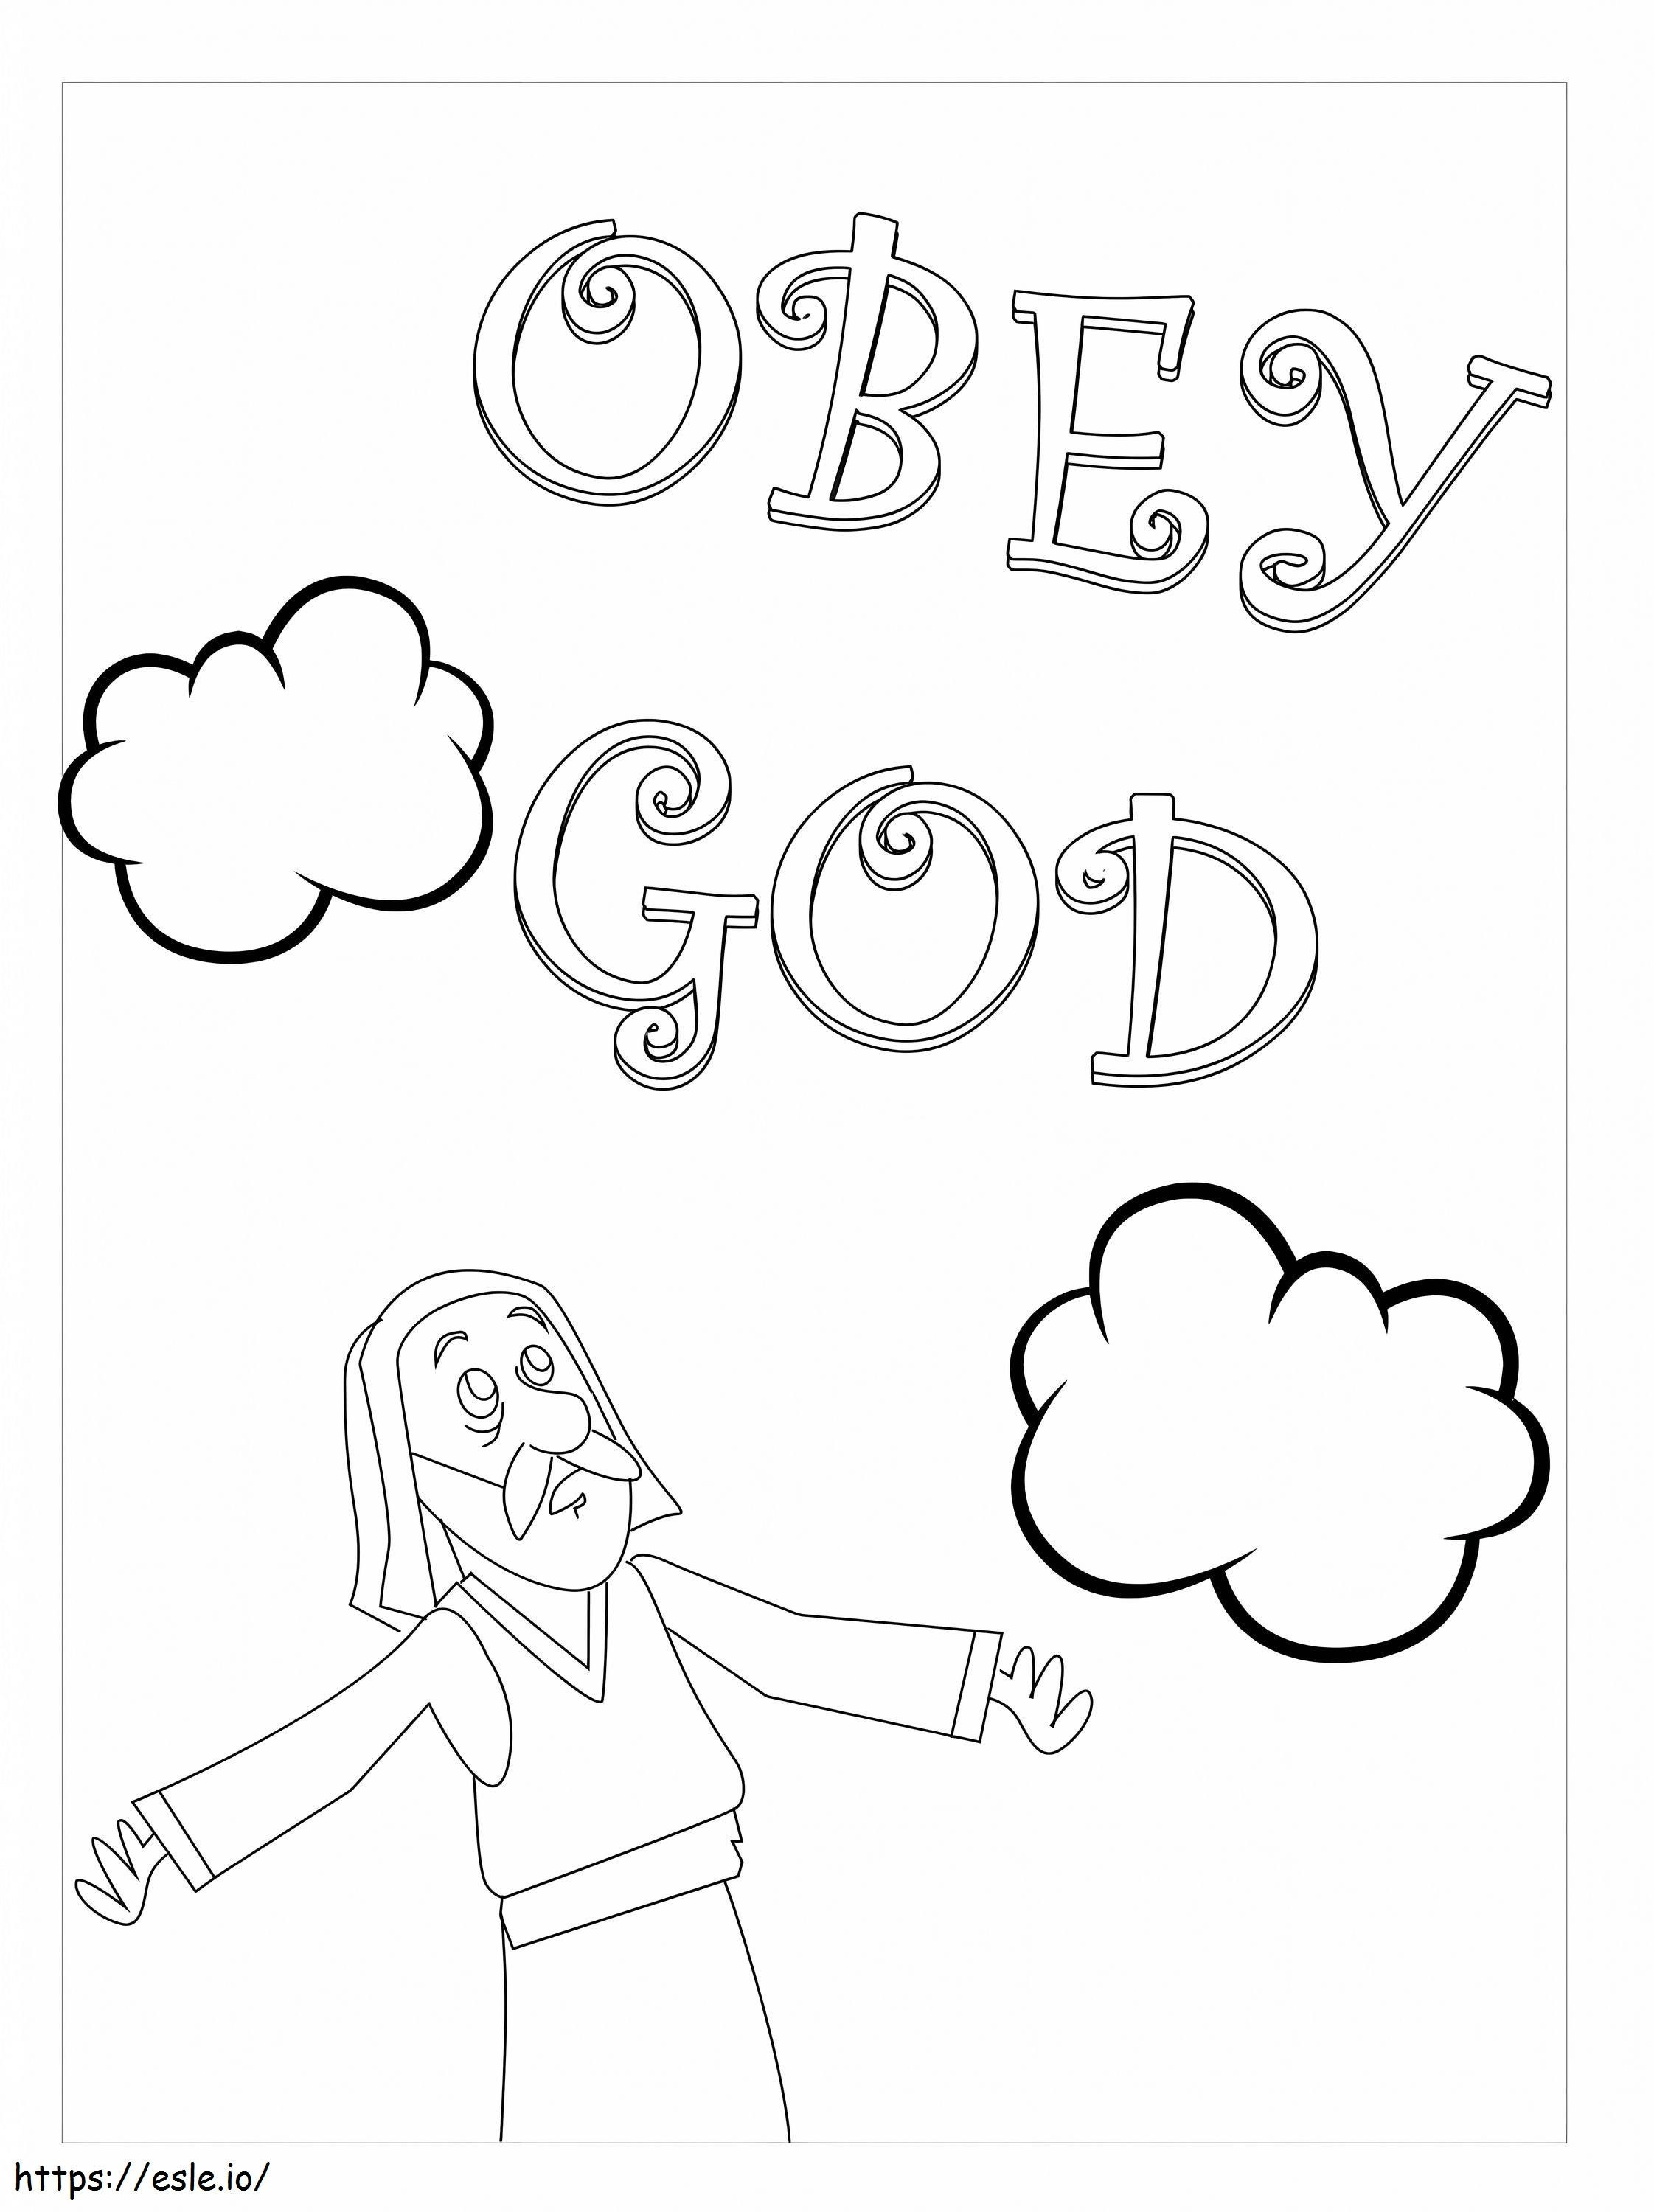 Obey God coloring page